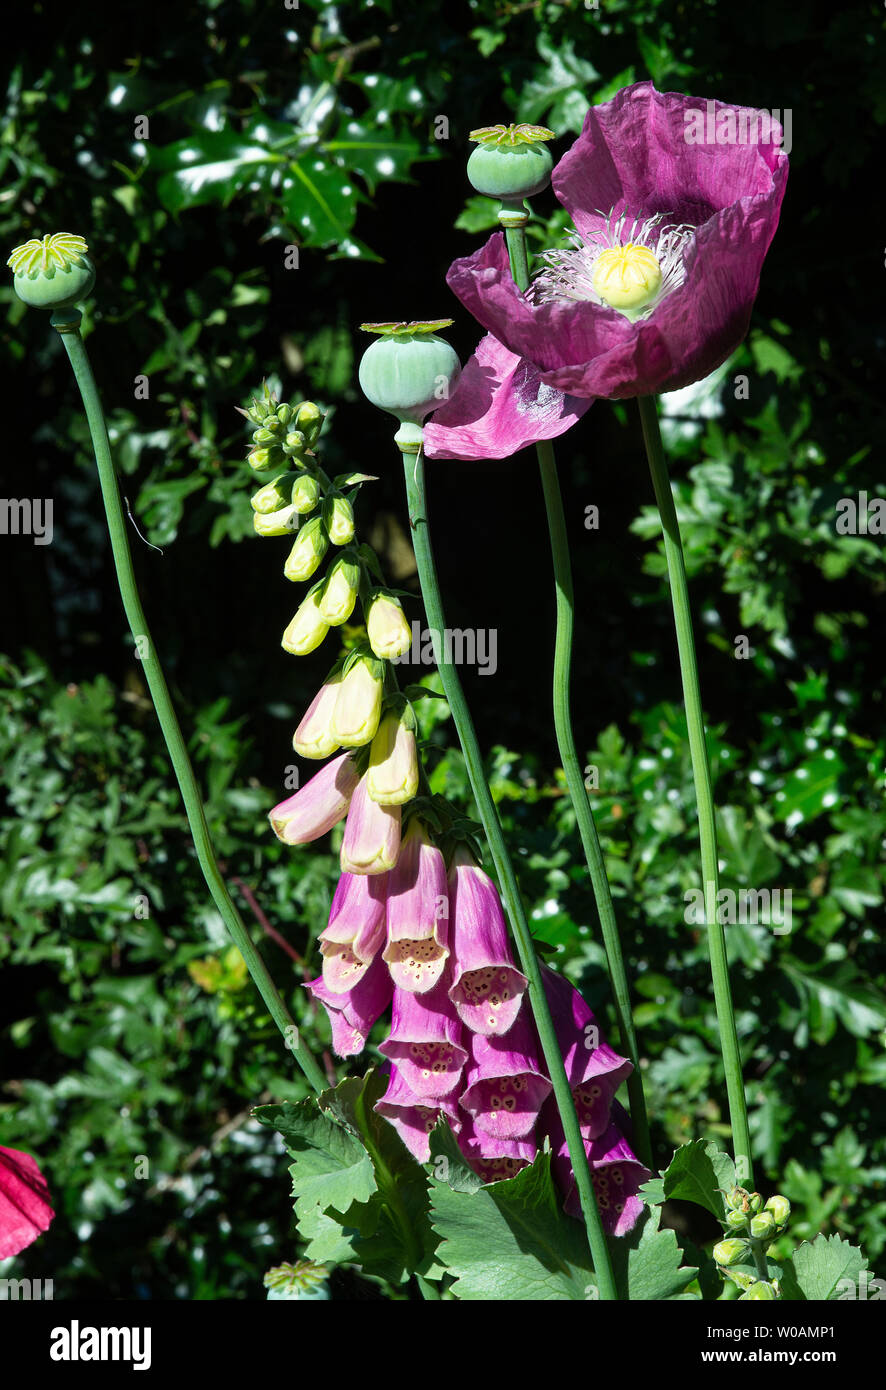 Foxgloves, Opium Poppies with Poppy Seed-heads and a Hawthorn Hedge Background in a Wild Garden in Alsager Cheshire England United Kingdom UK Stock Photo